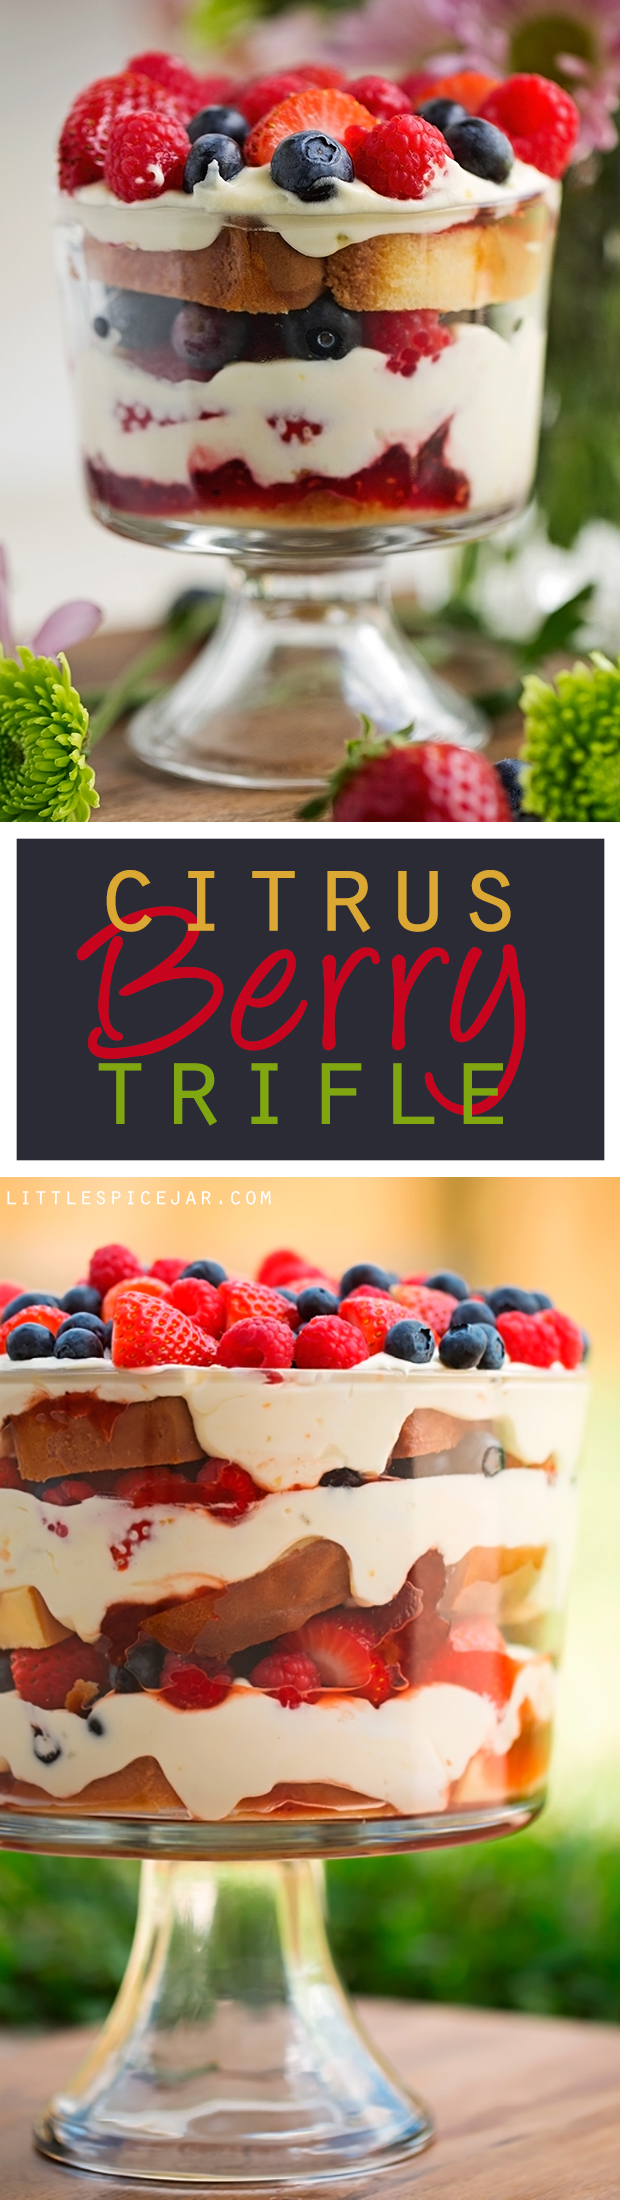 Citrus Berry Trifle - The EASIEST dessert ever! made with layers of lemon flavor whipped cream, poundcake, and lots of berries! #desserts #trifle #berrytrfile | Littlespicejar.com